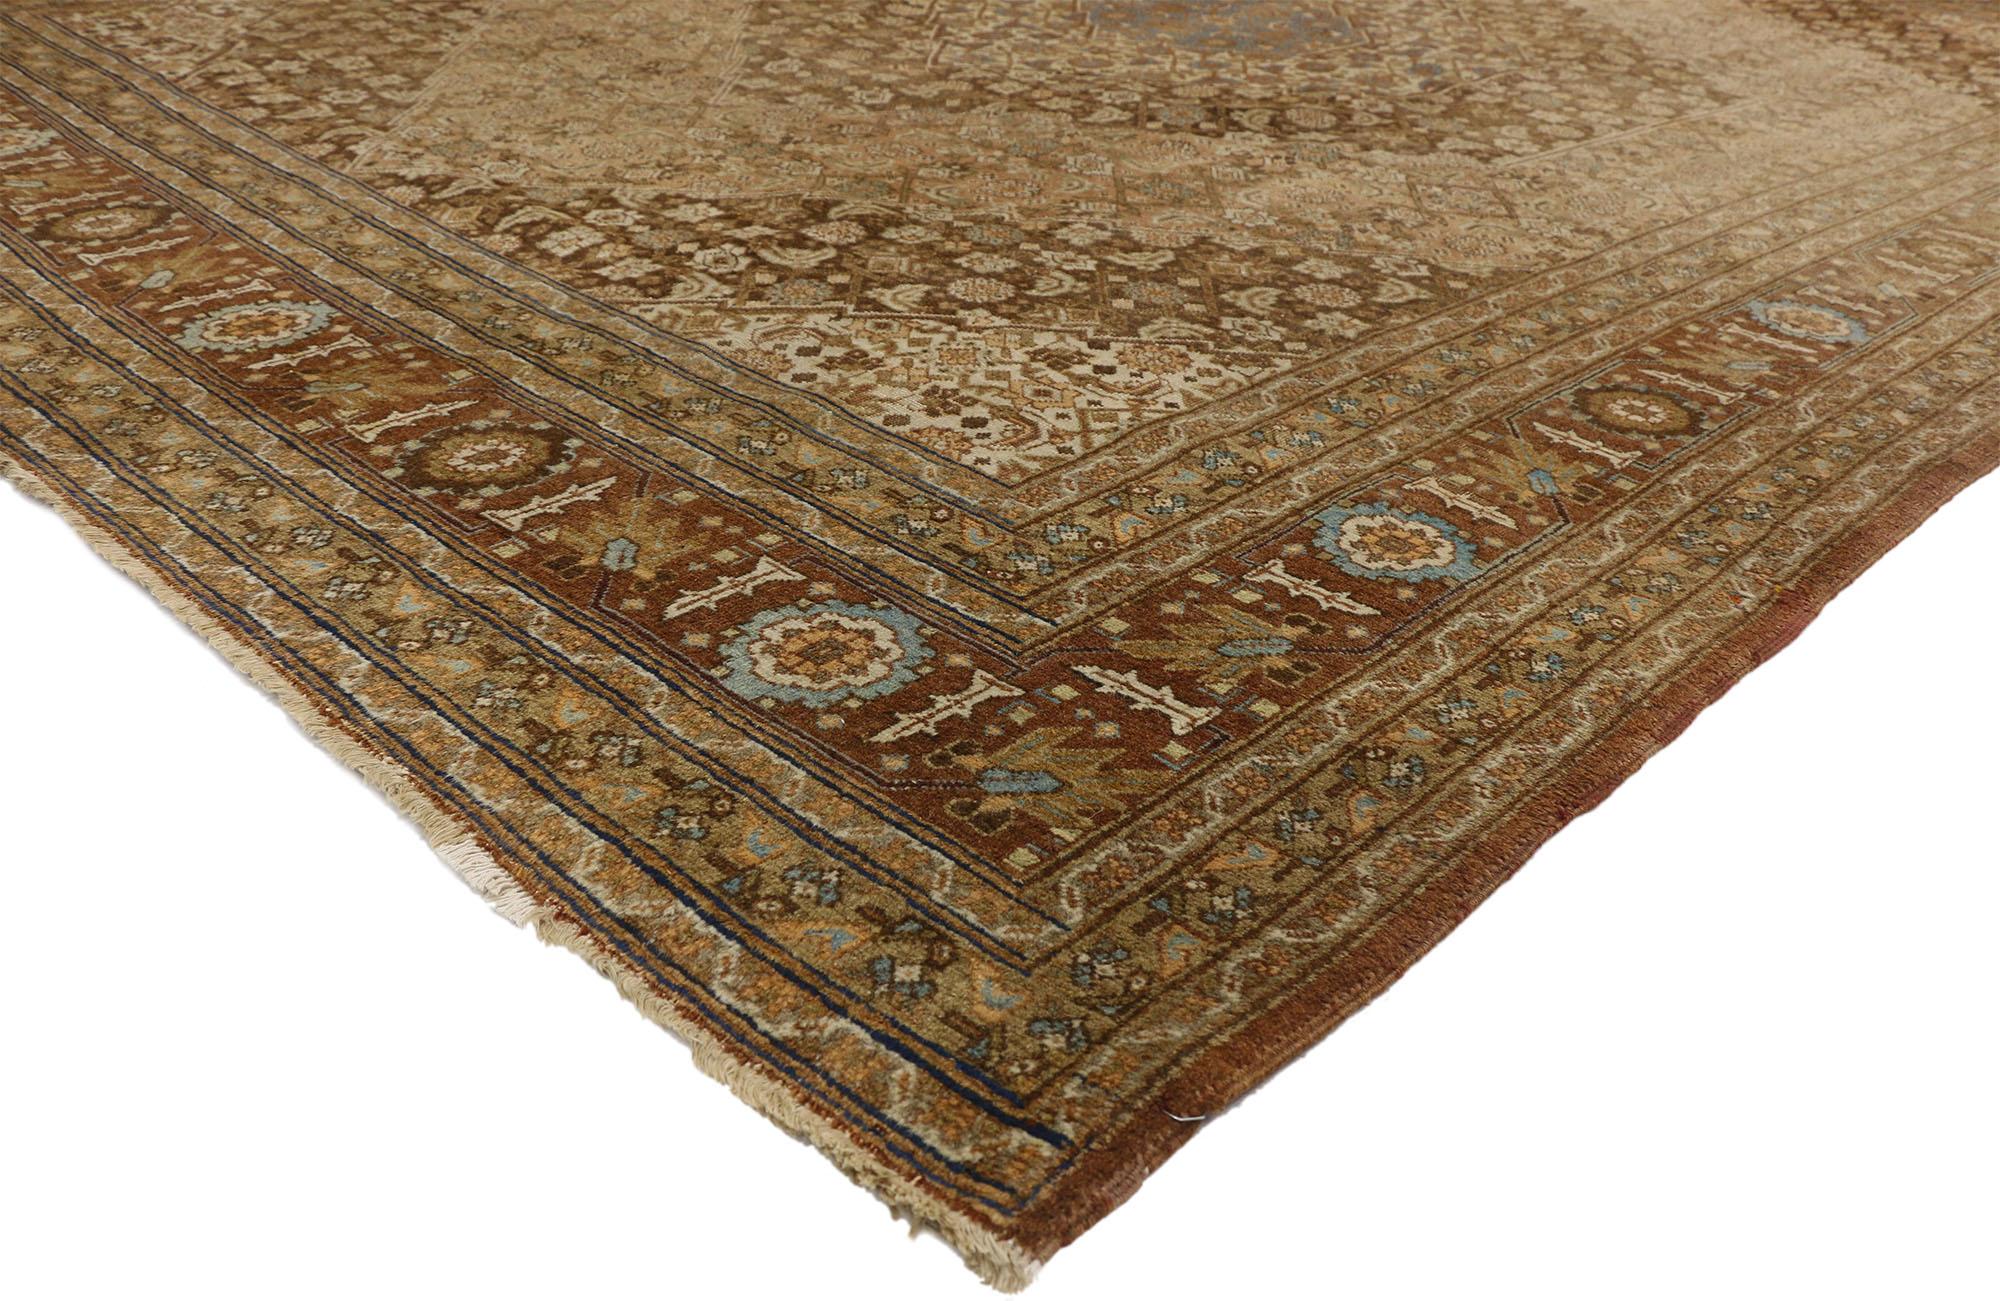 74327 Haji Khalili Antique Persian Tabriz rug with Warm, Industrial style. This hand-knotted wool Haji Khalili distressed antique Persian Tabriz rug features a series of four serrated hexagonal medallions centered on an abrashed field. The